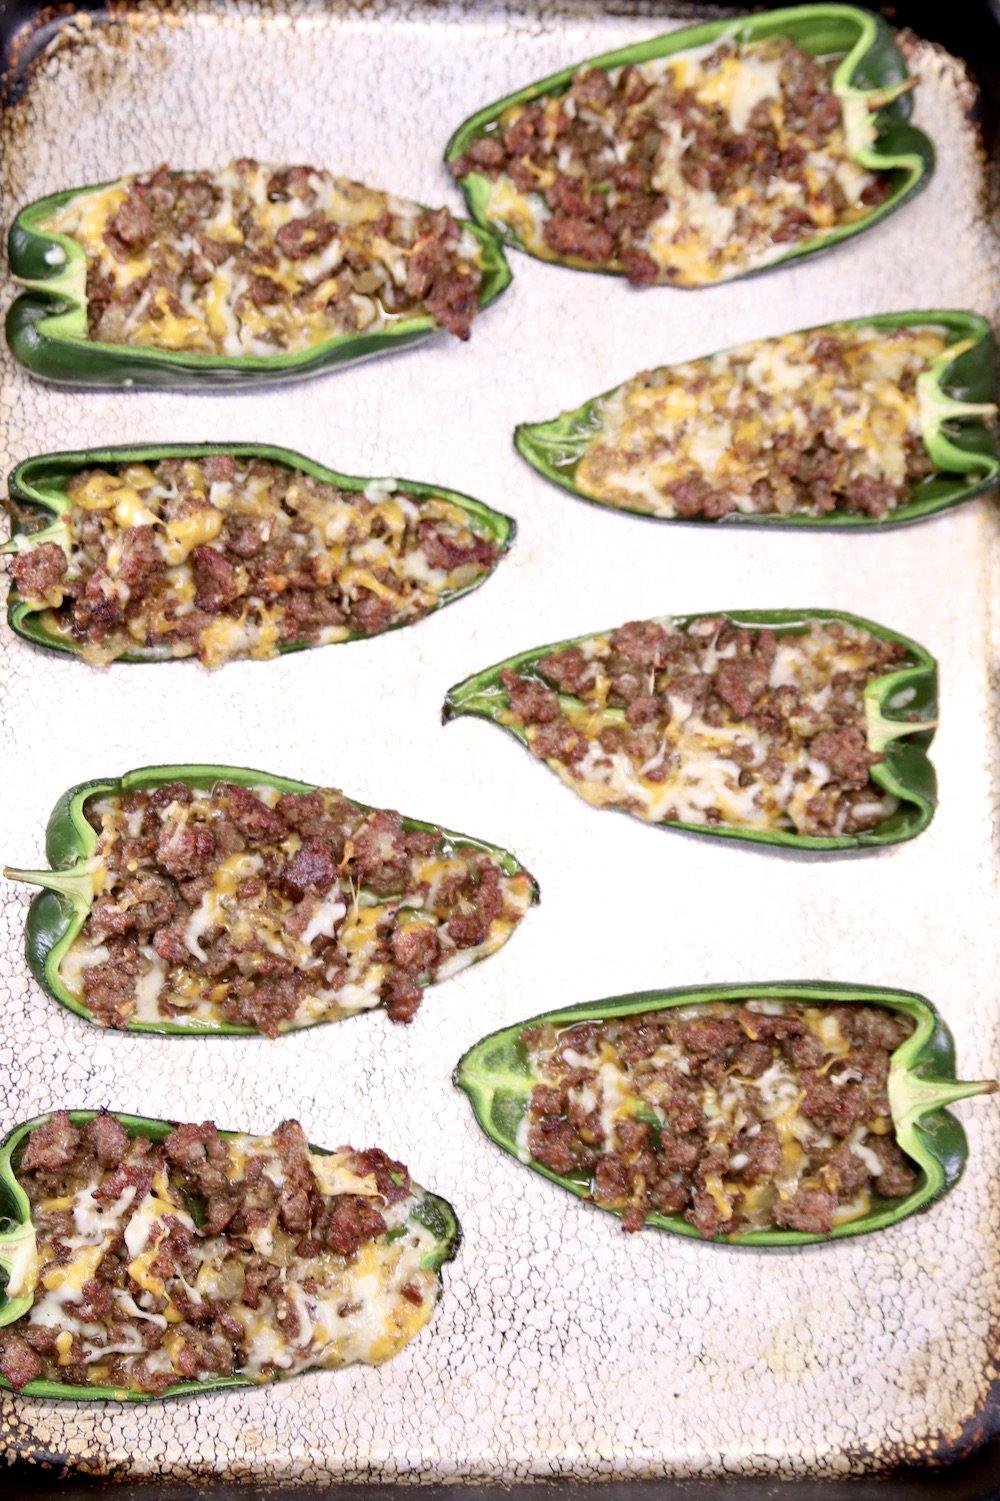 baked poblano peppers with sausage and cheese stuffing on a sheet pan